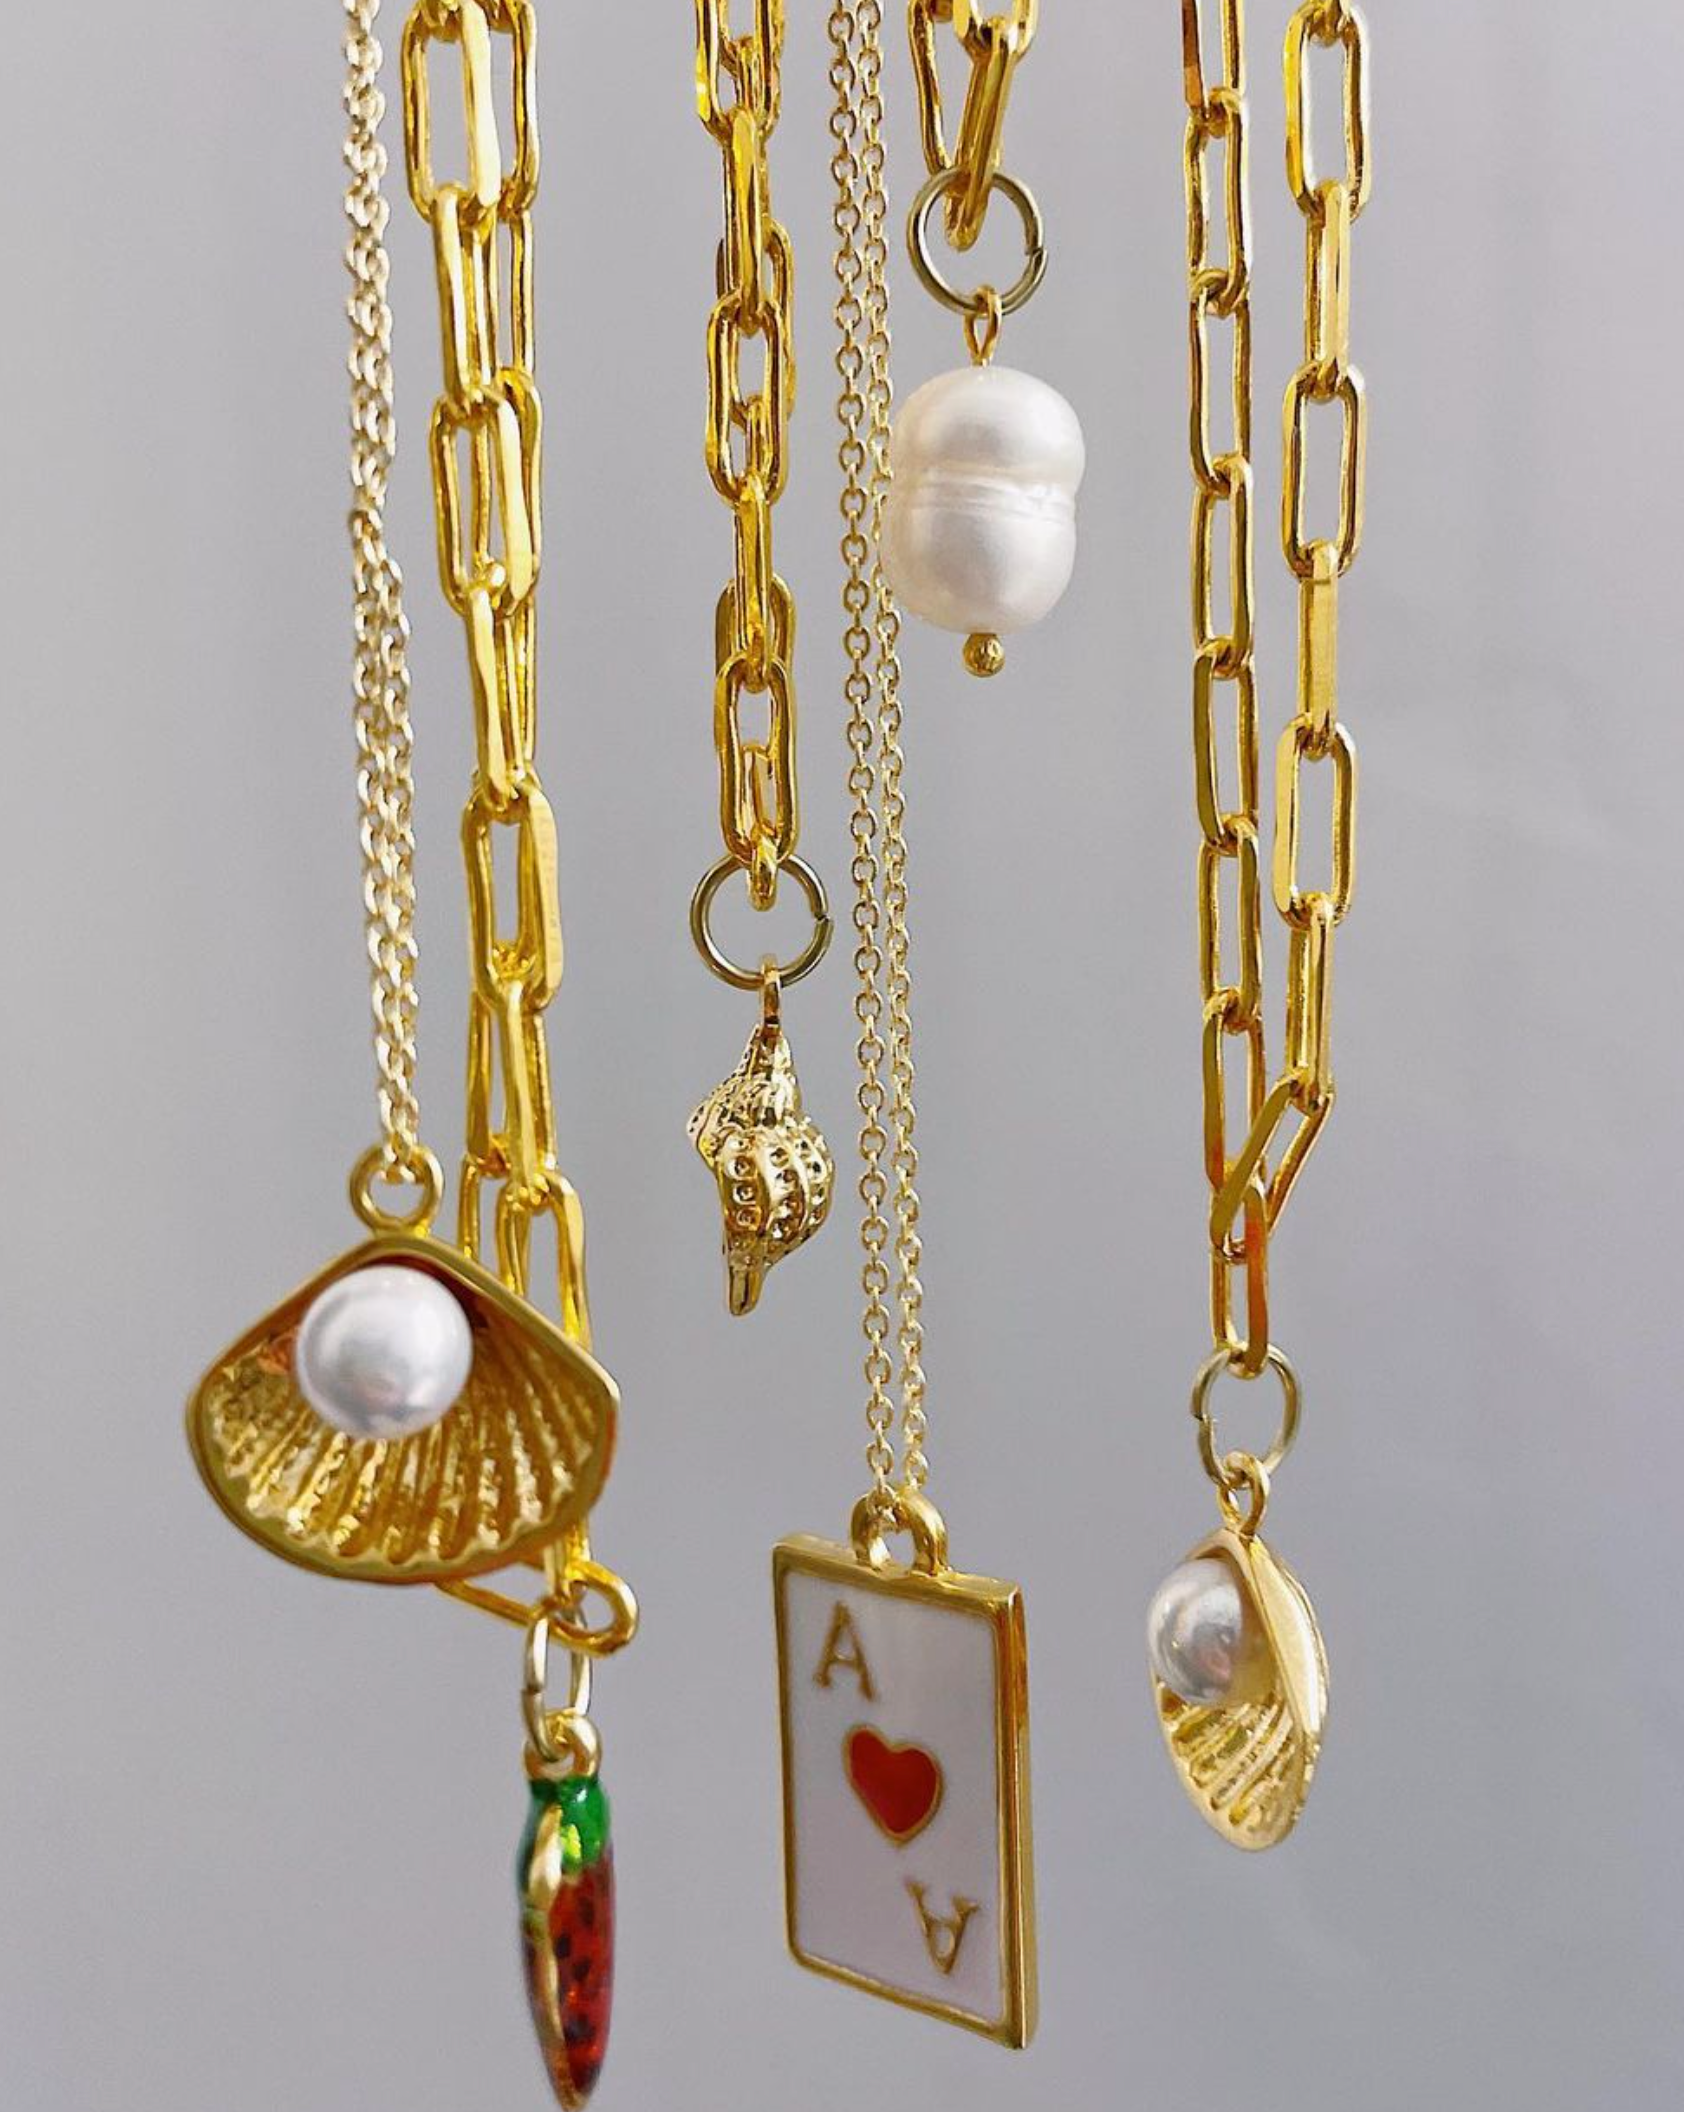 hanging charm necklaces from good jujuu art